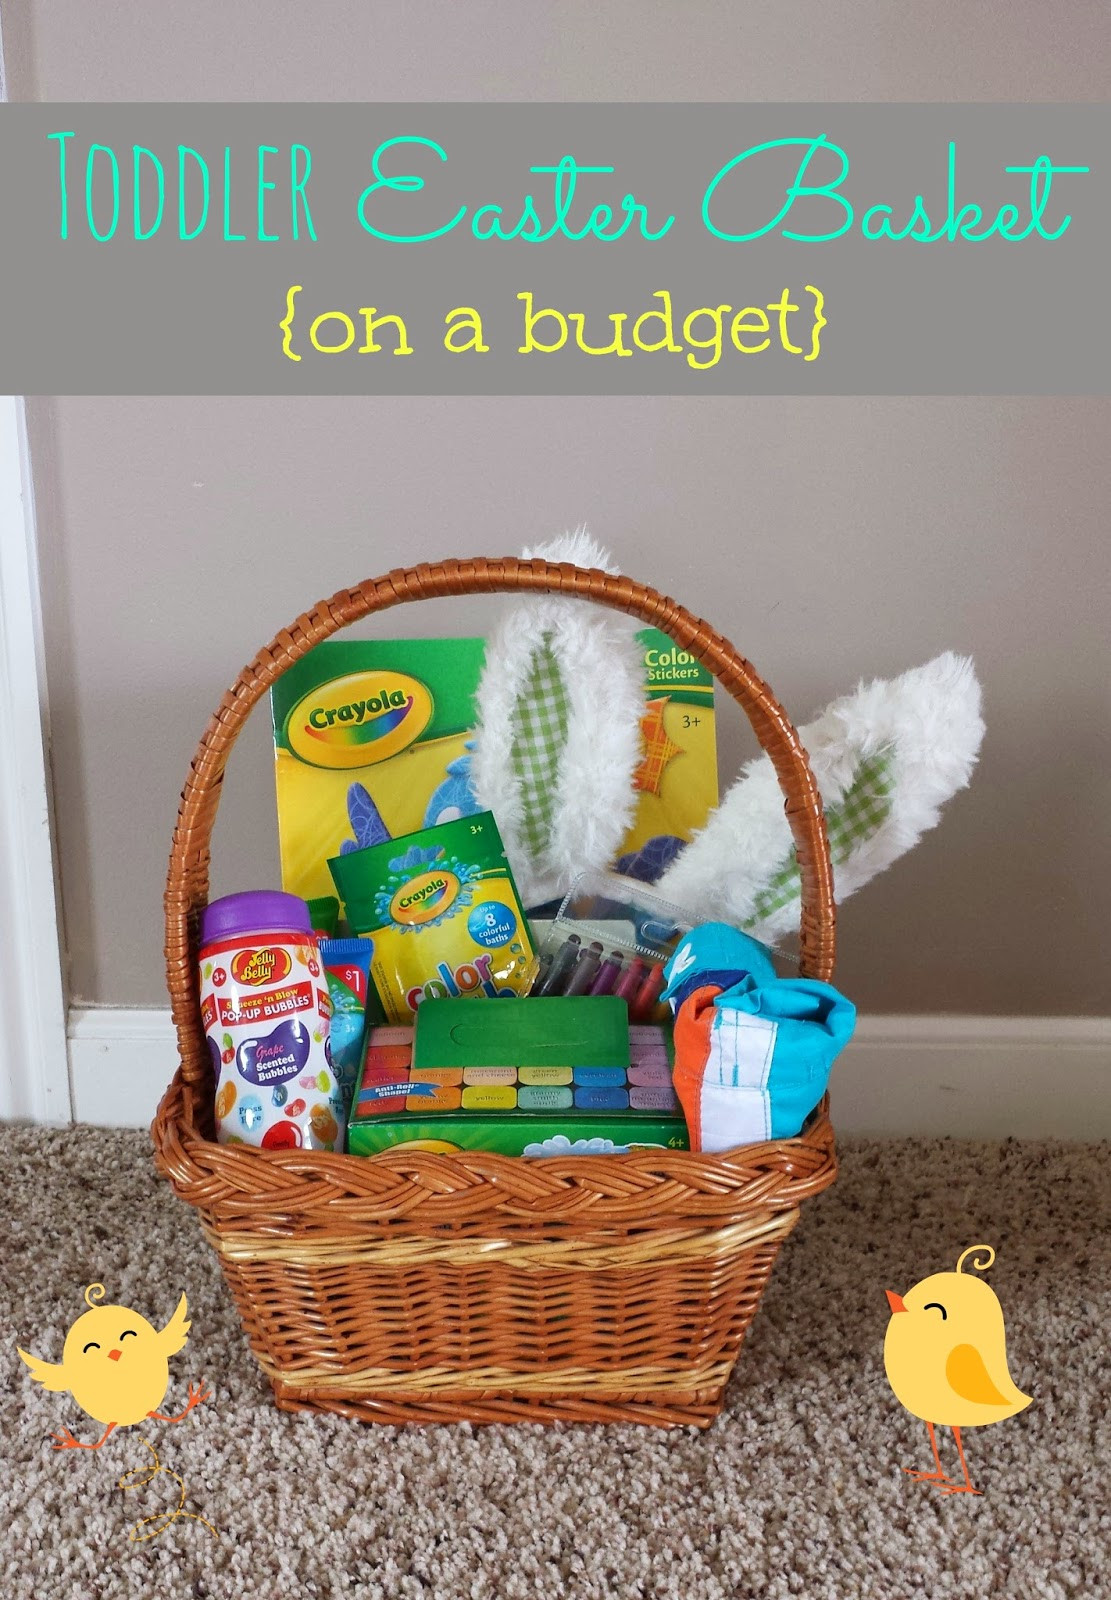 Gift Ideas For Easter Baskets
 Simple Suburbia Toddler Easter Basket Ideas